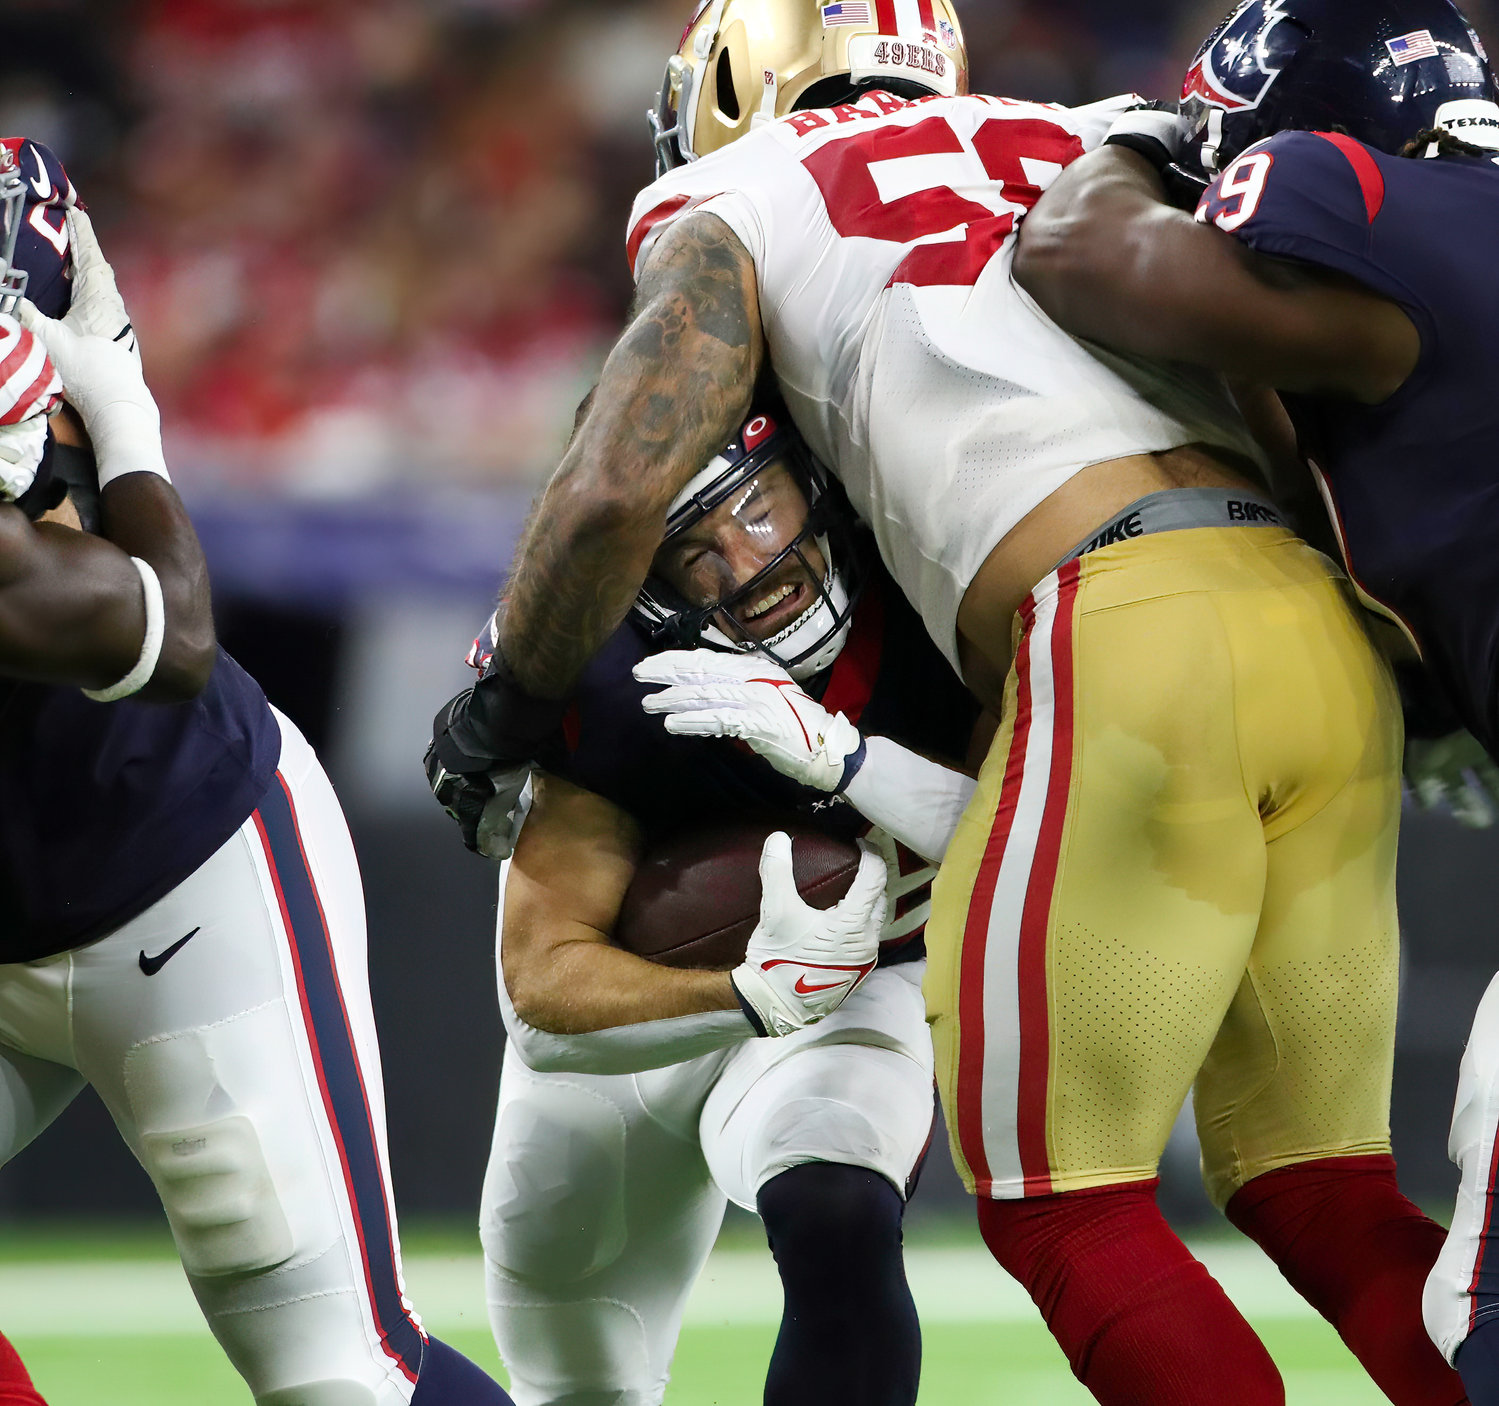 San Francisco 49ers defensive end Alex Barrett (58) wraps up Houston Texans running back Rex Burkhead (28) for a tackle during an NFL preseason game between the Texans and the 49ers in Houston, Texas, on August 25, 2022.